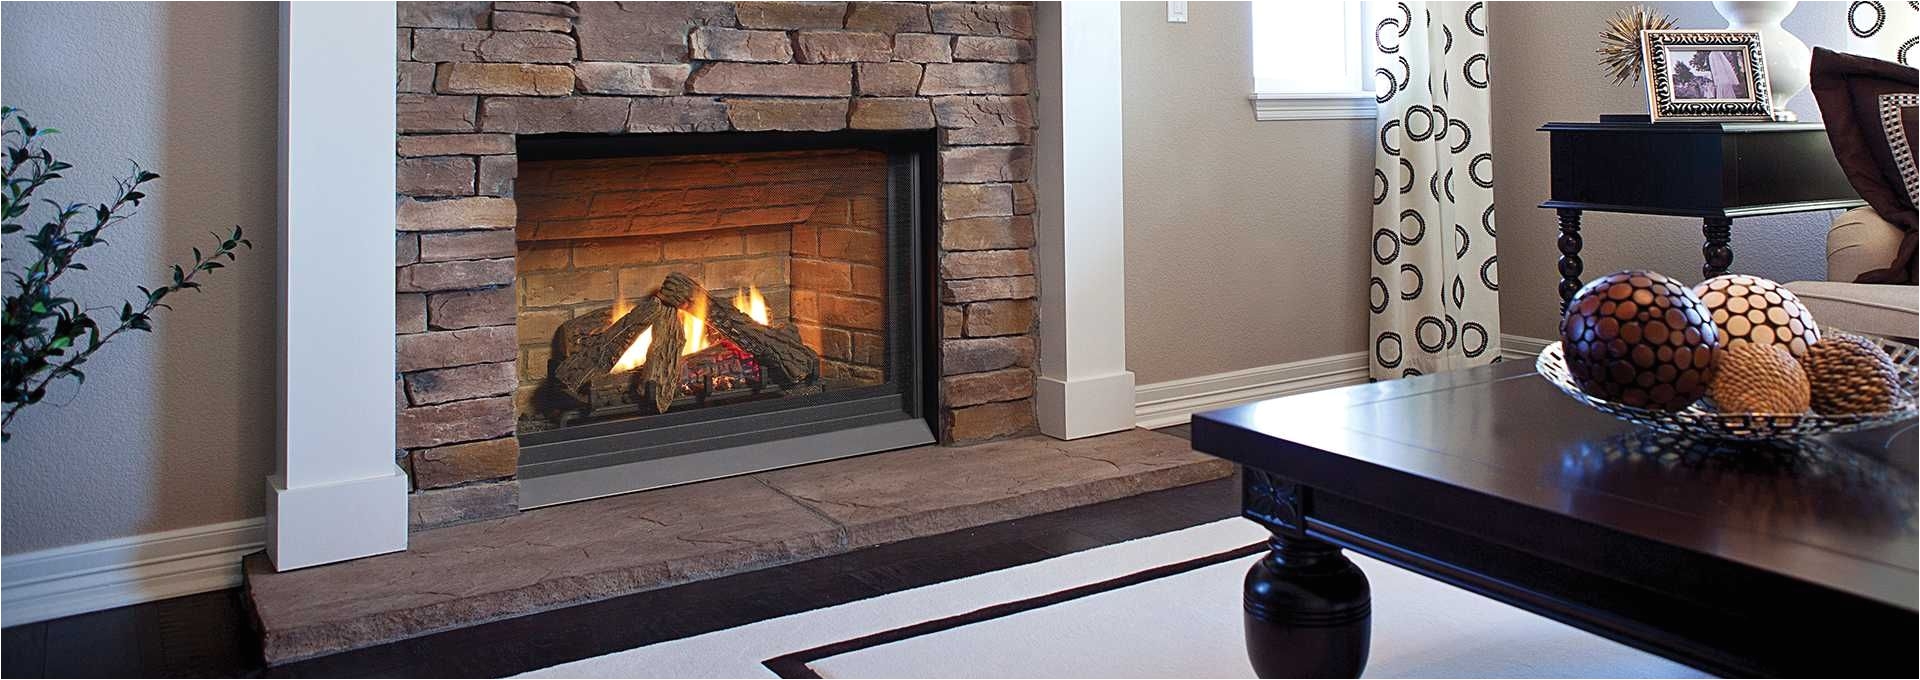 Cost Of Installing A Gas Fireplace Insert Cool 10 Perfect Gas Fireplace Insert Reviews for Your Cozy Home In